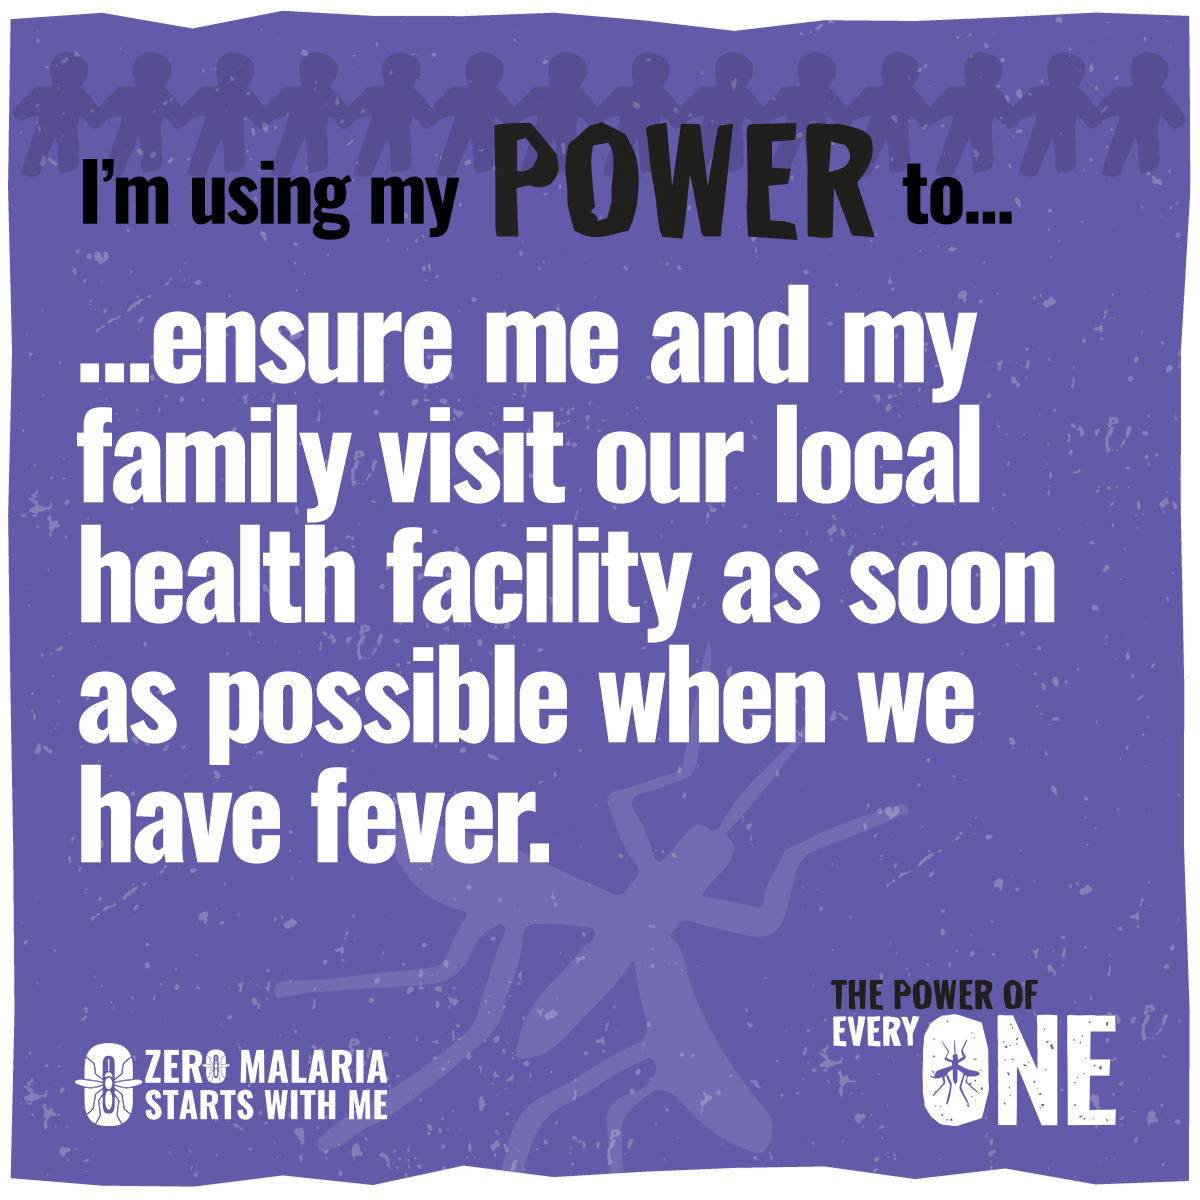 Dreaming of a malaria-free Kenya for every family? It's not just a vision - it's achievable! Let's unite and harness the #PowerOfEveryONE to make it happen. #zeromalaria